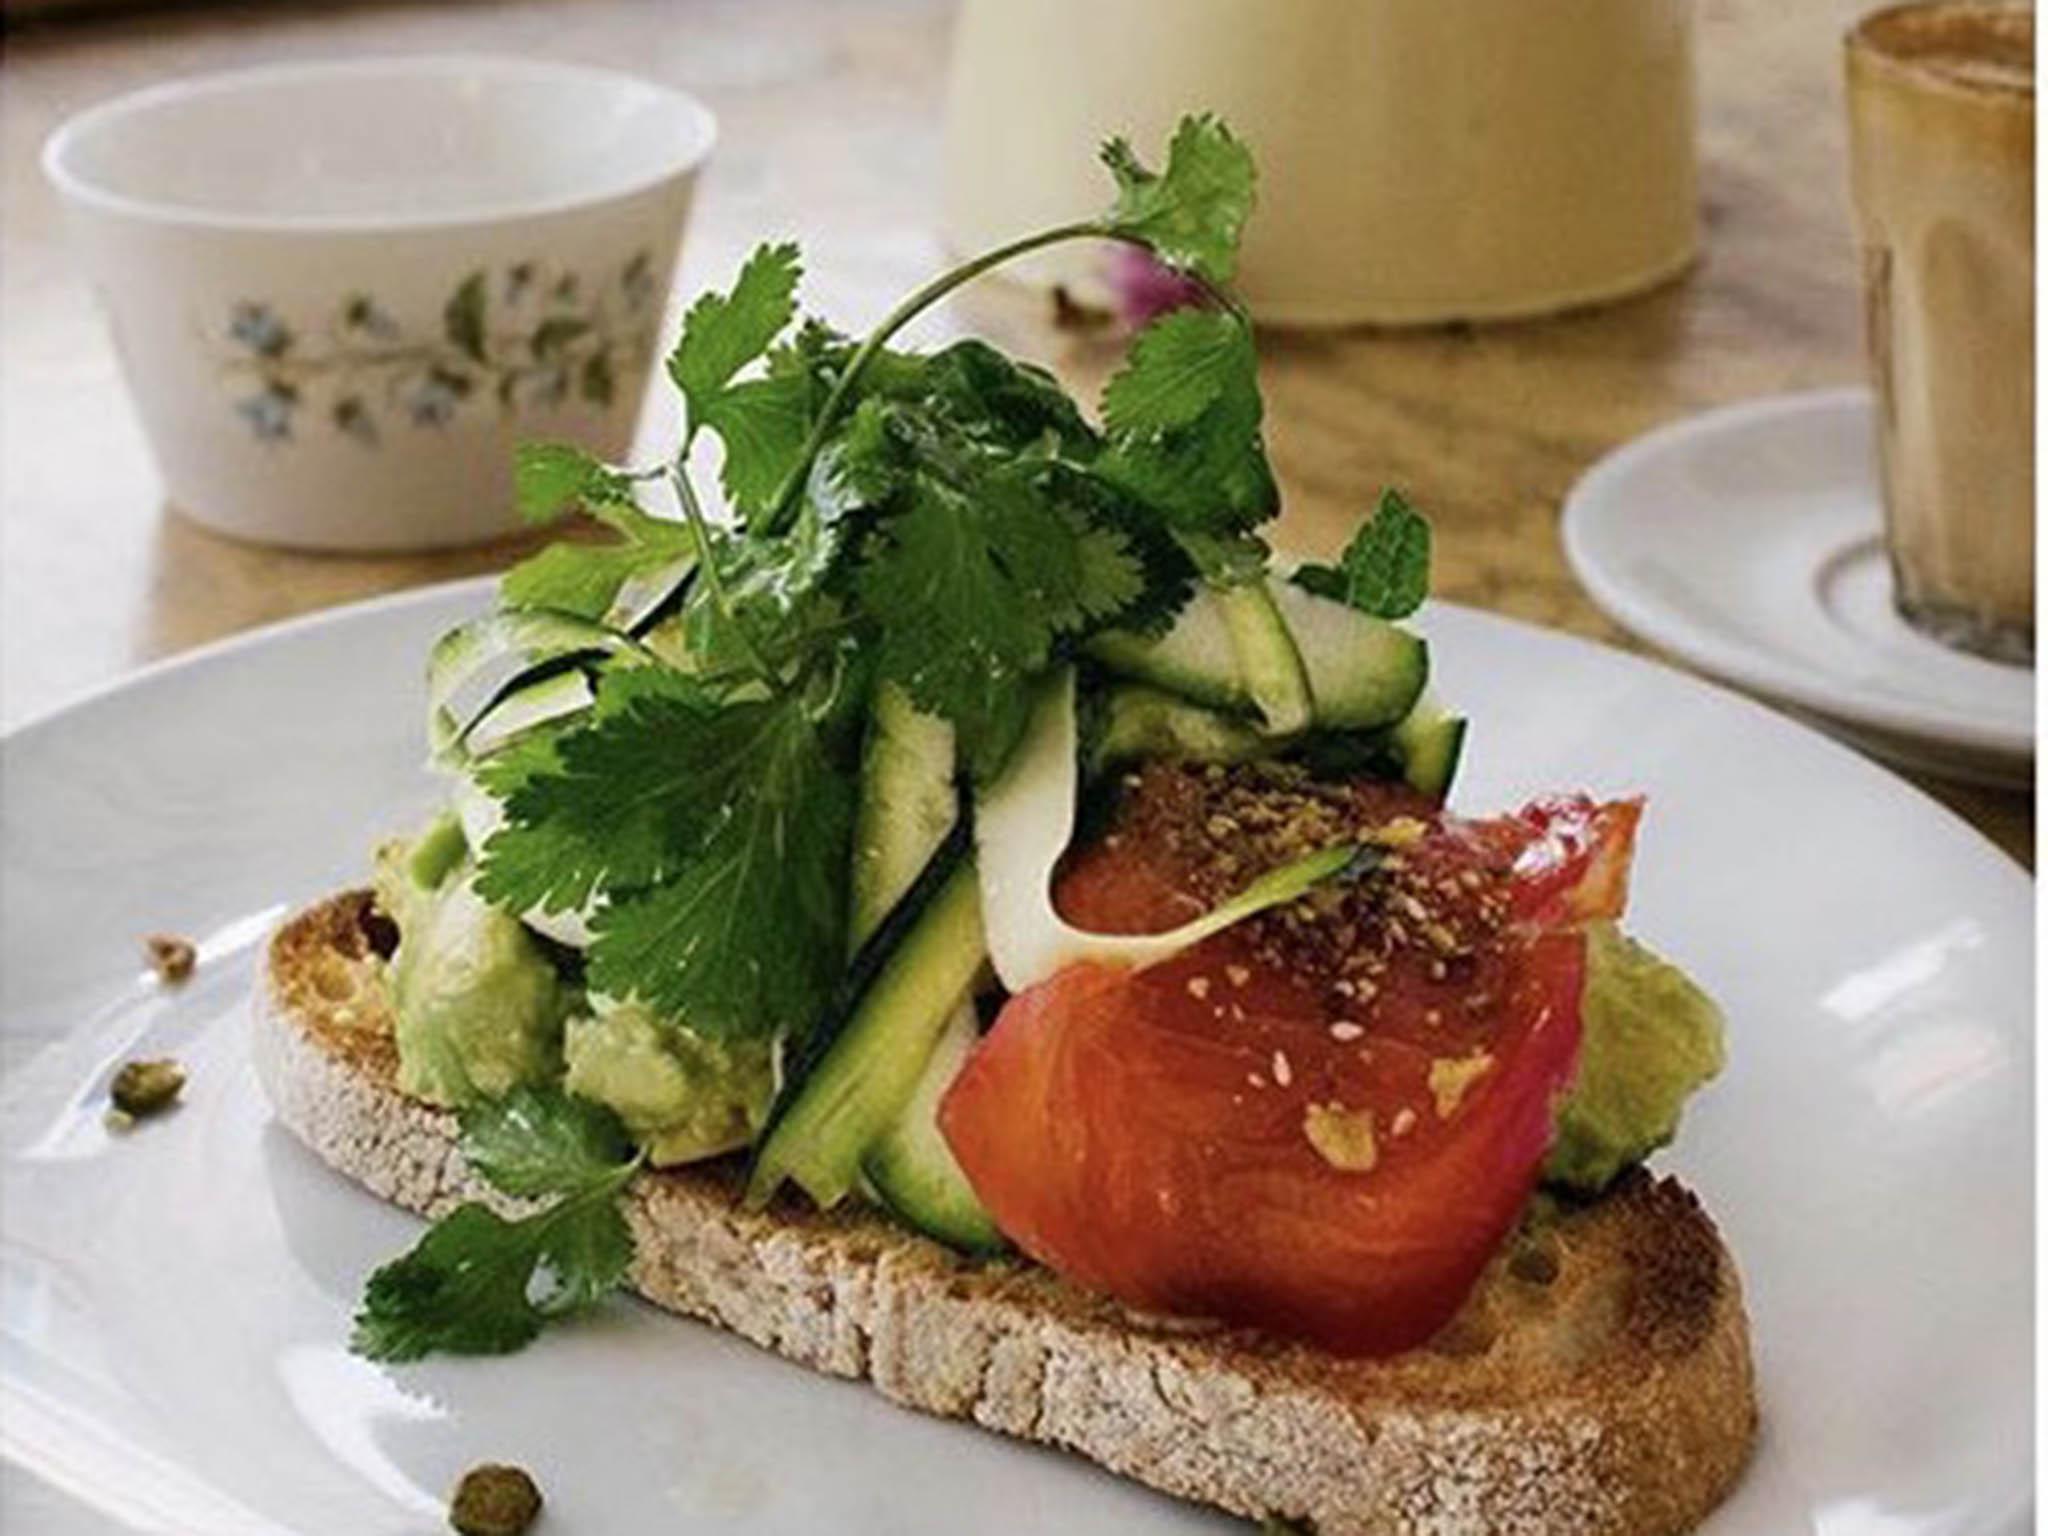 Smashed avocado is a brunch staple suitable for all – not just millennials